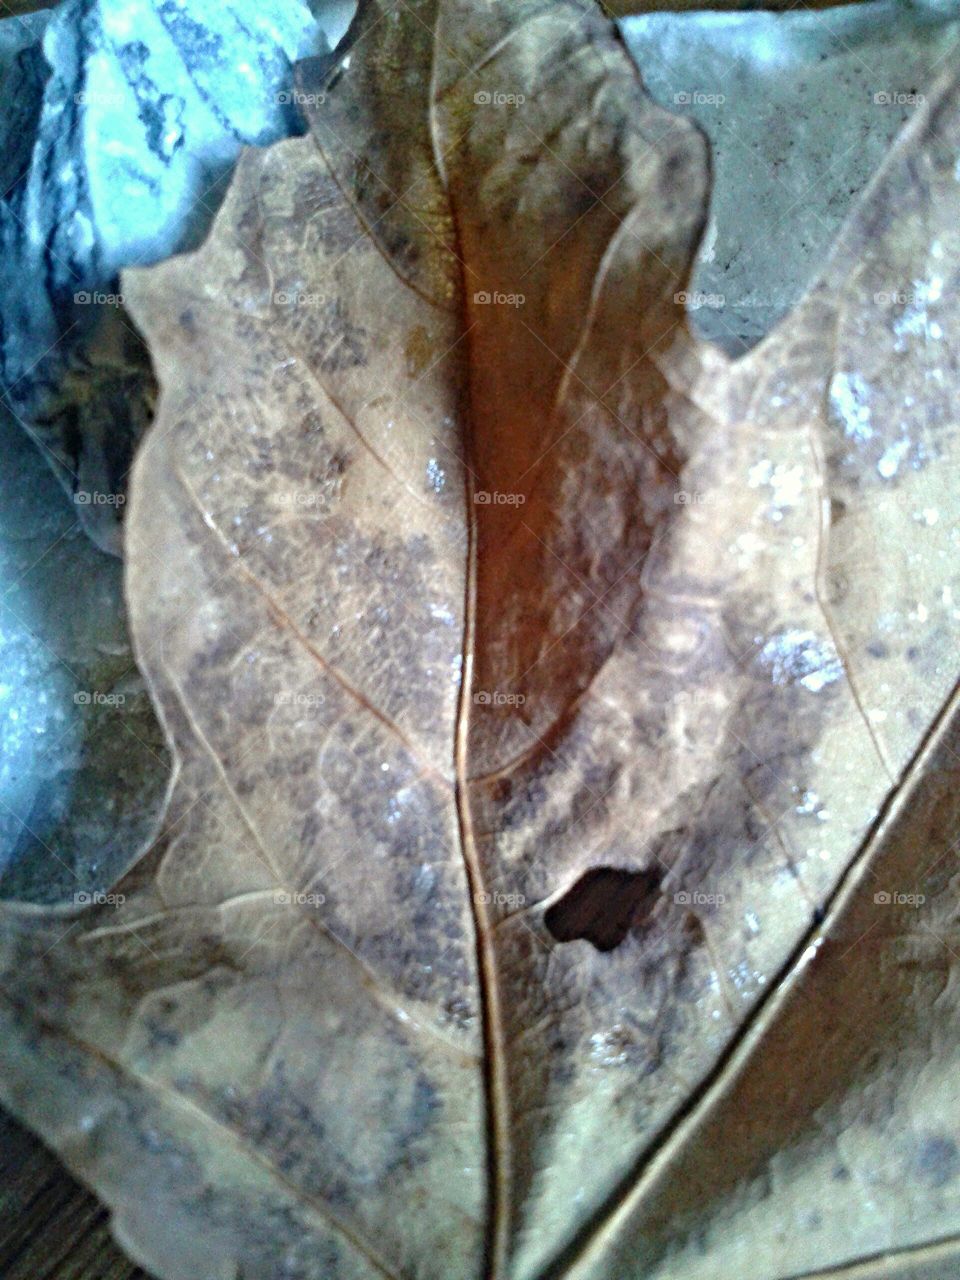 Leaf texture. Dried but shows character.